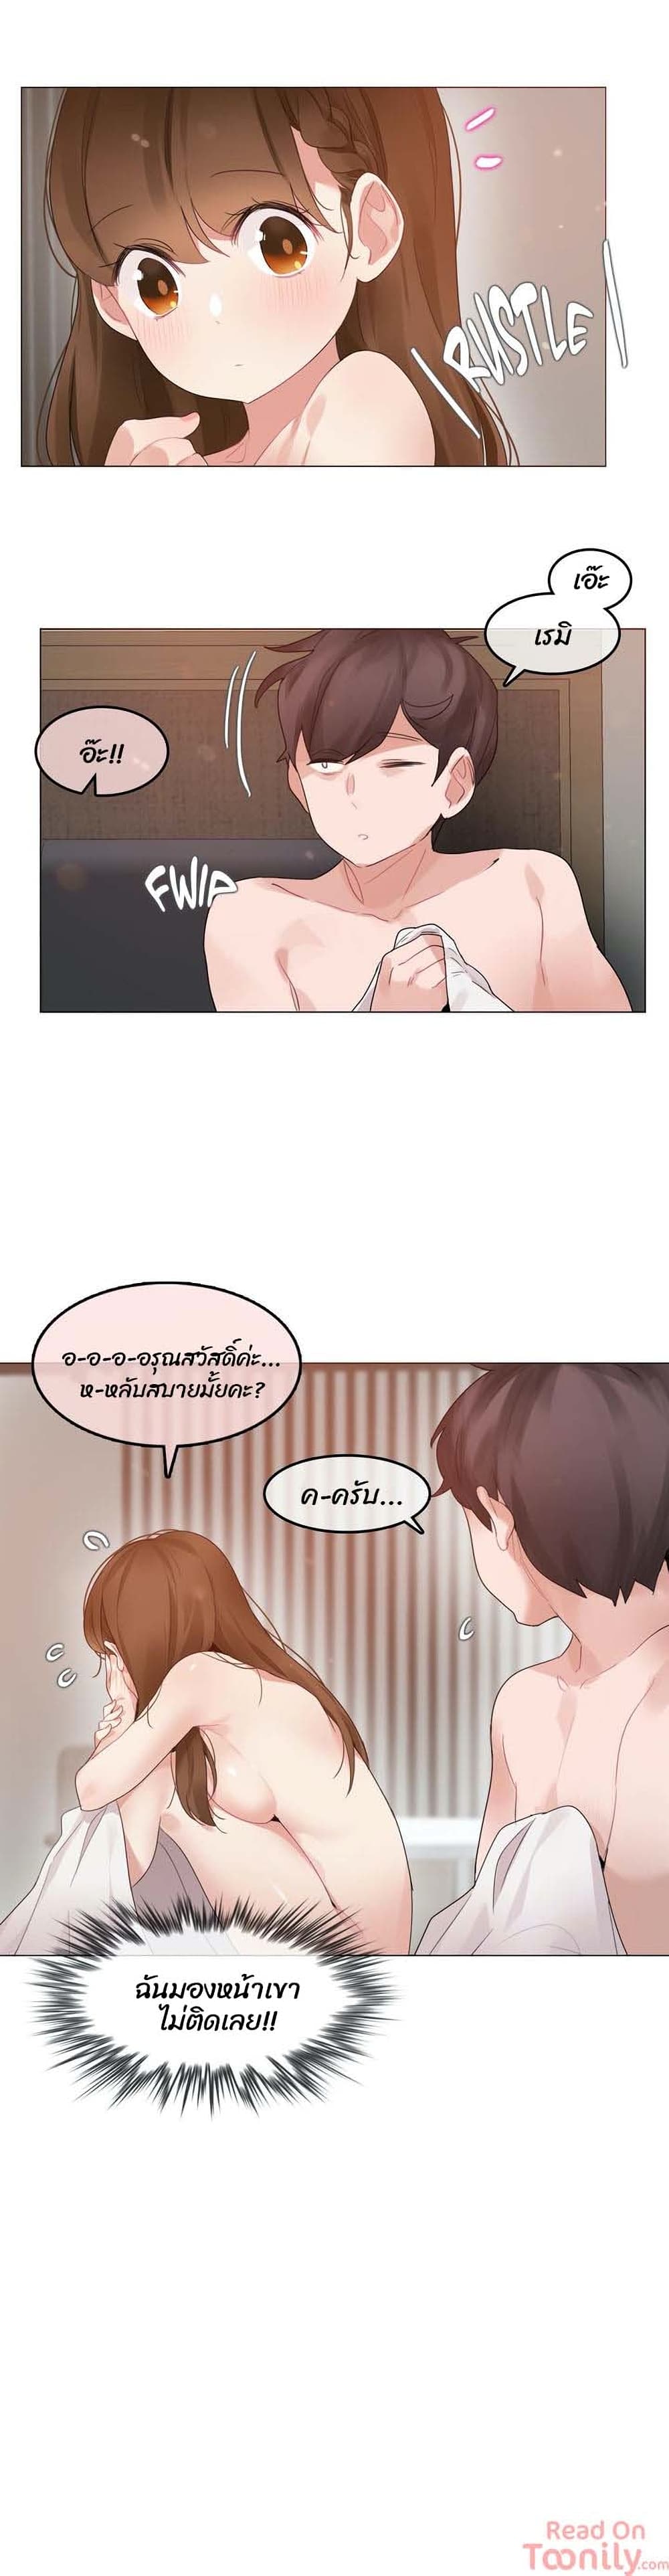 A Pervert's Daily Life 80 (2)